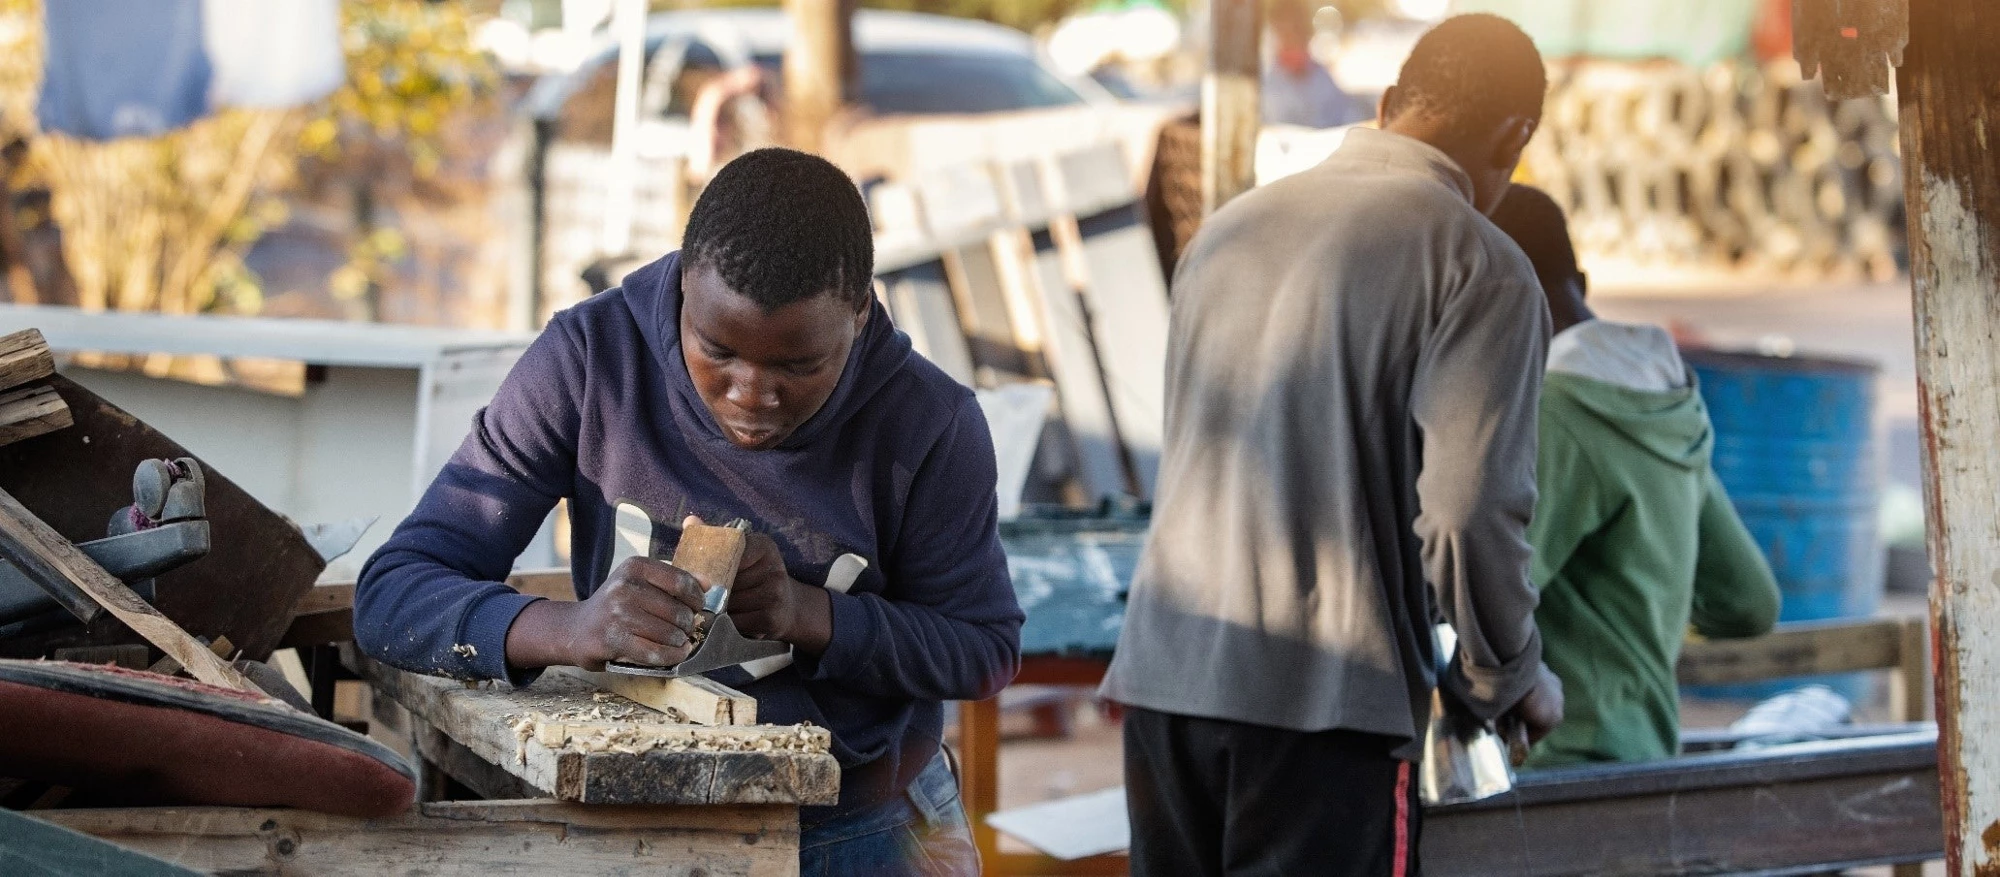 How to connect low- and middle-skilled workers and migrants in developing countries with employers? Photo: Shutterstock